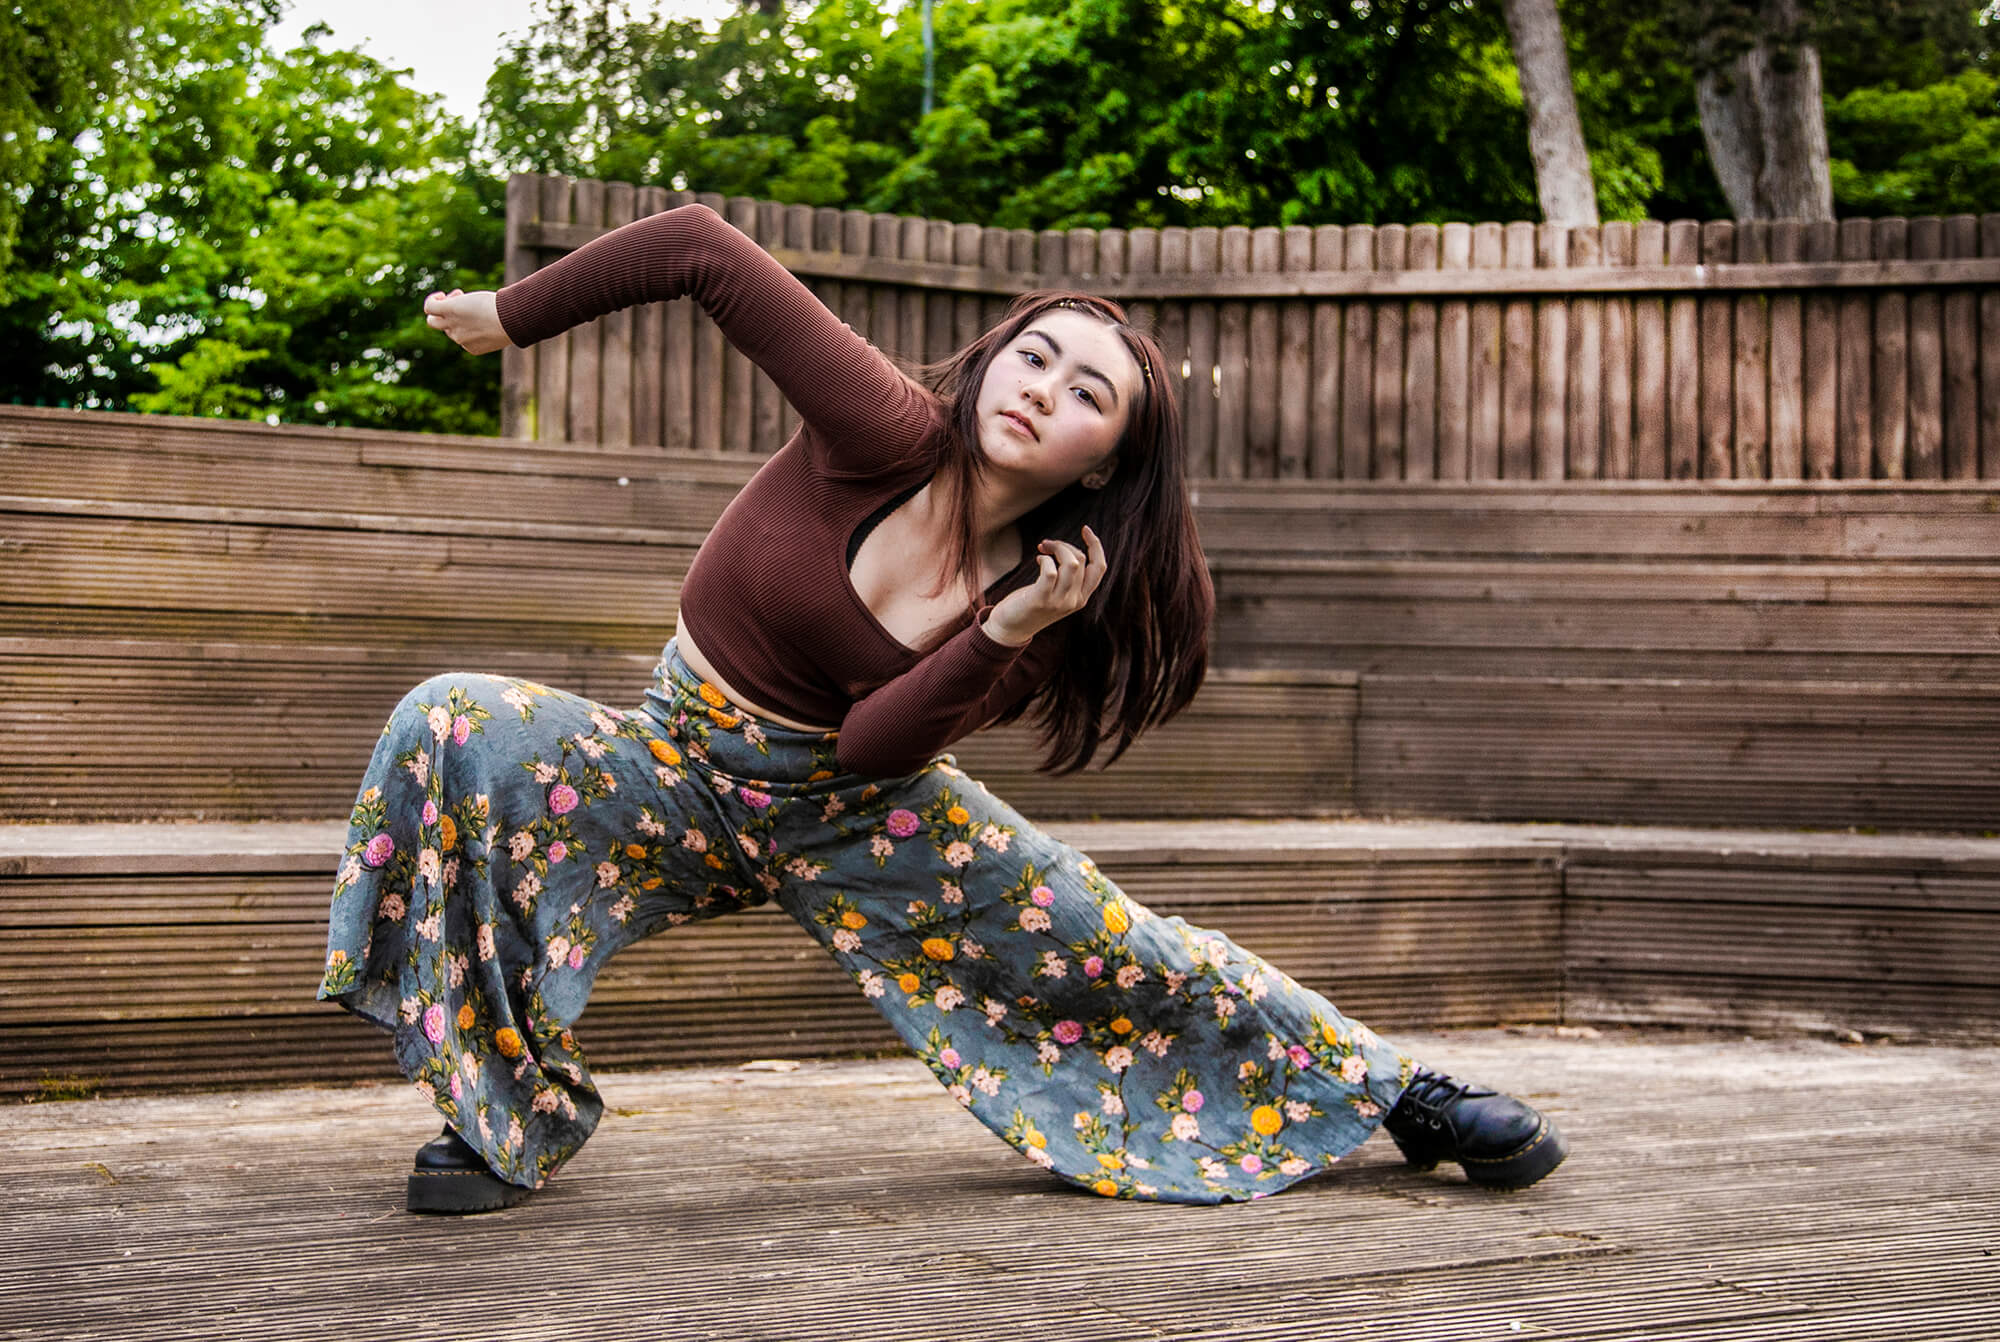 global majority female dancer lunging to the left with albow pointed in the air. In front of soft focus trees and wooden gate. Wearing brown long sleeved t-shirt and flowered flared trousers. 